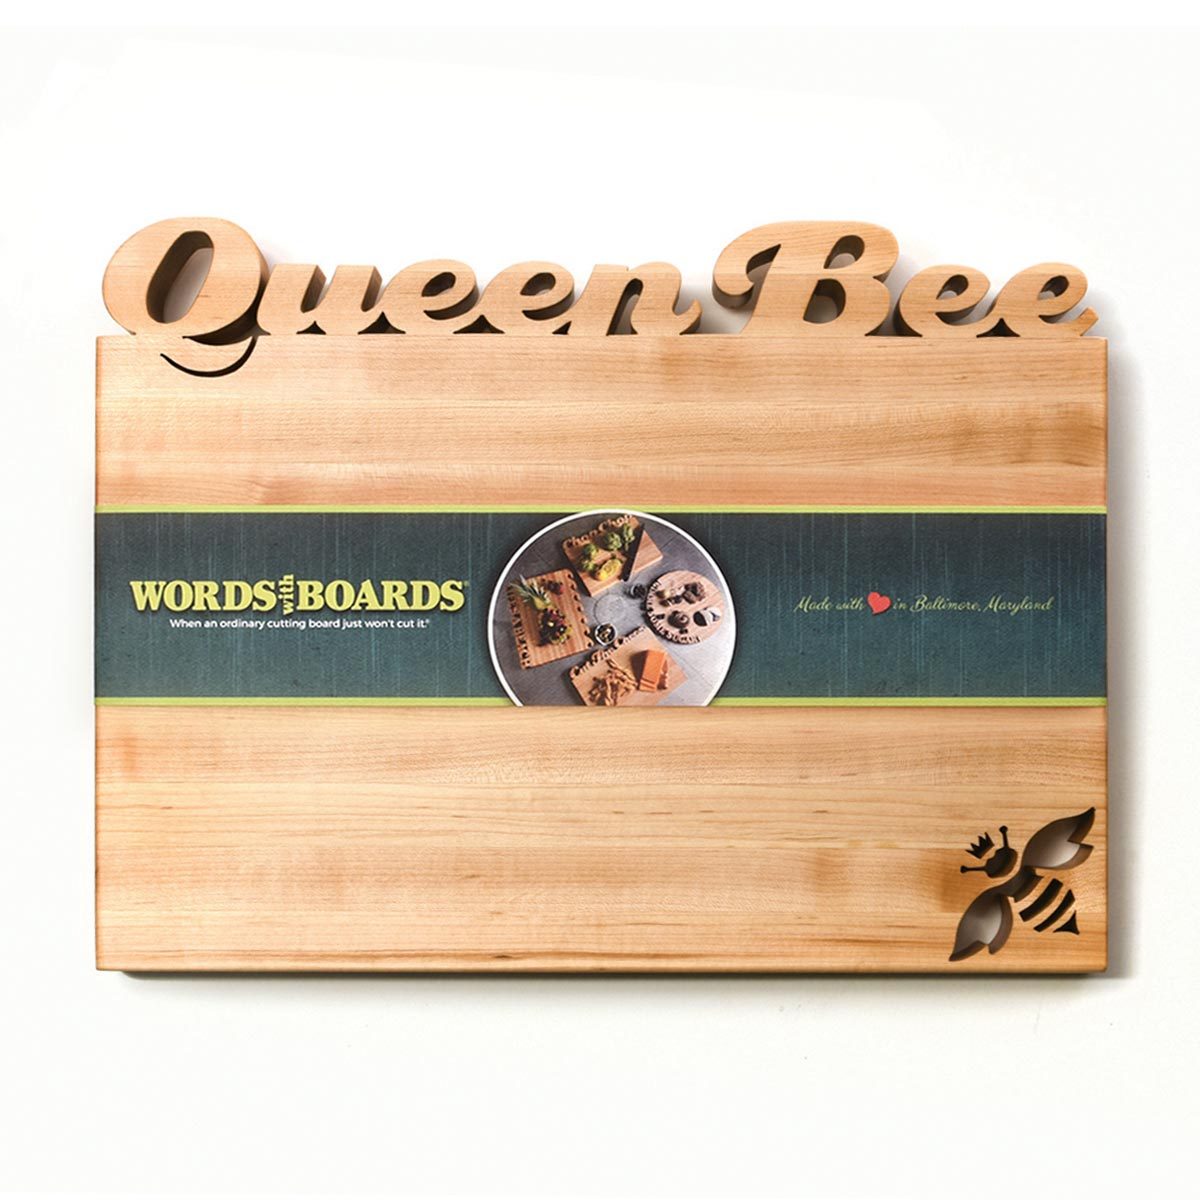 https://wordswithboards.com/cdn/shop/products/UNIQUE_WEDDING_GIFT_WOOD_CUTTING_BOARD-www.wordswithboards.com.jpg?v=1530126188